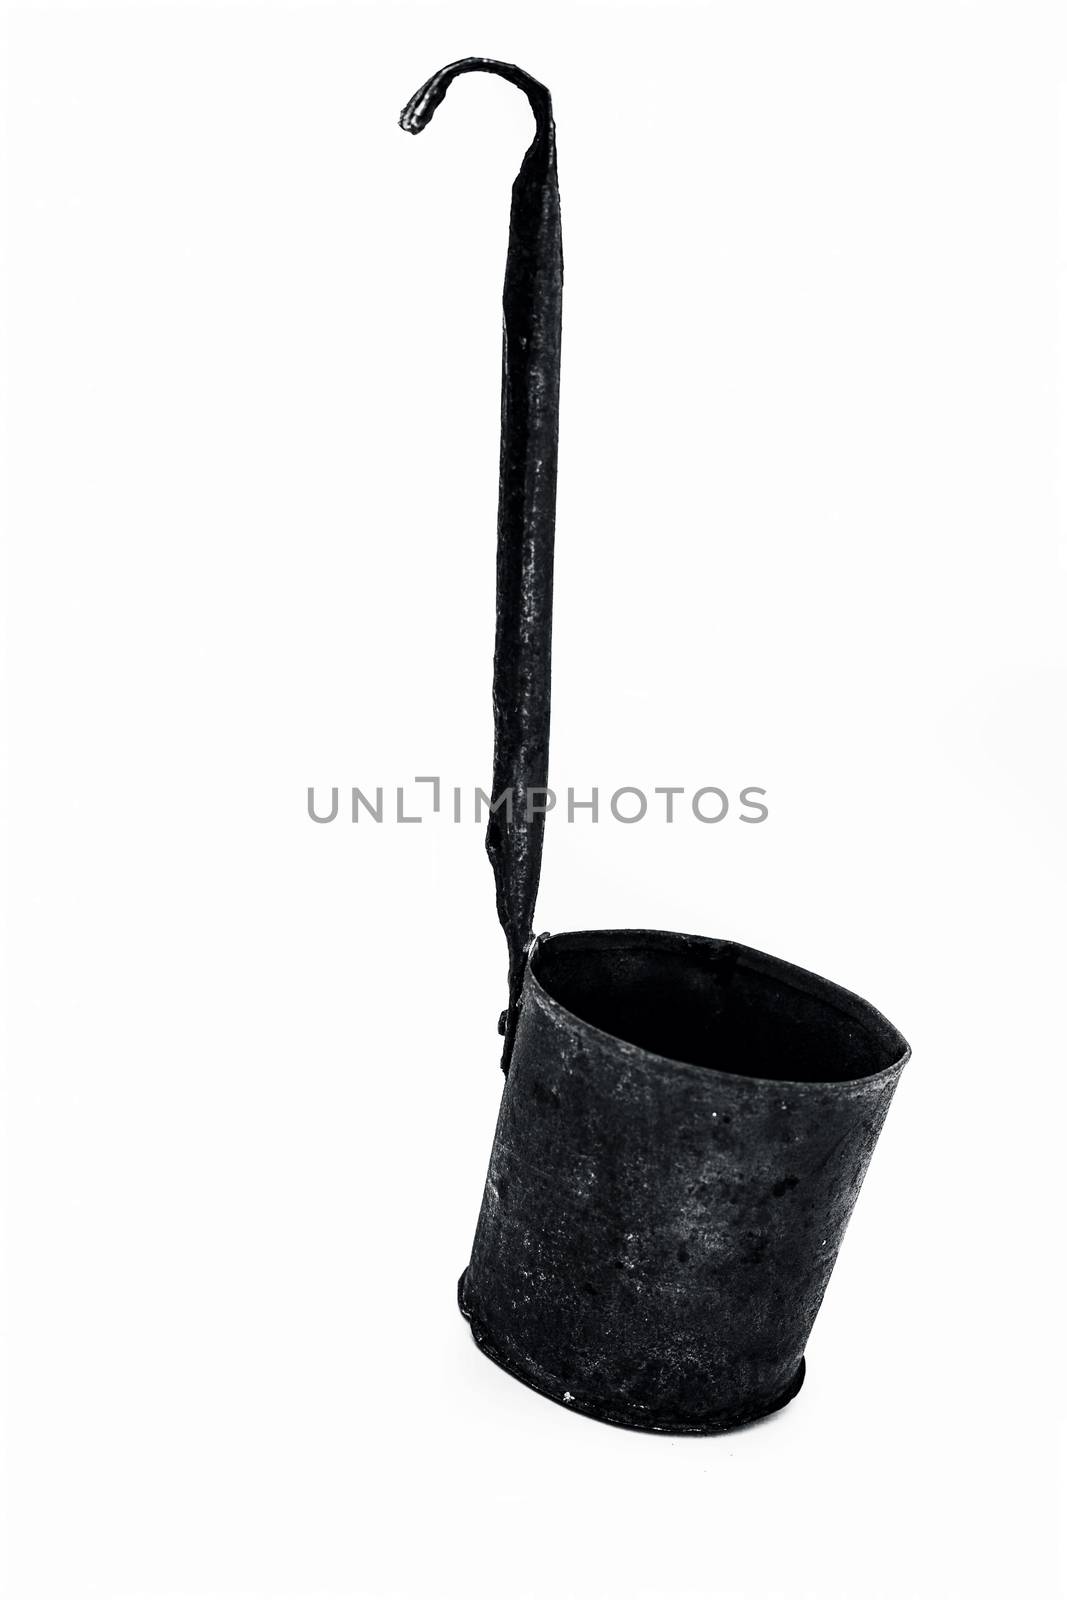 Close up of black colored metal liquid measuring domestic jug or cup isolated on white.